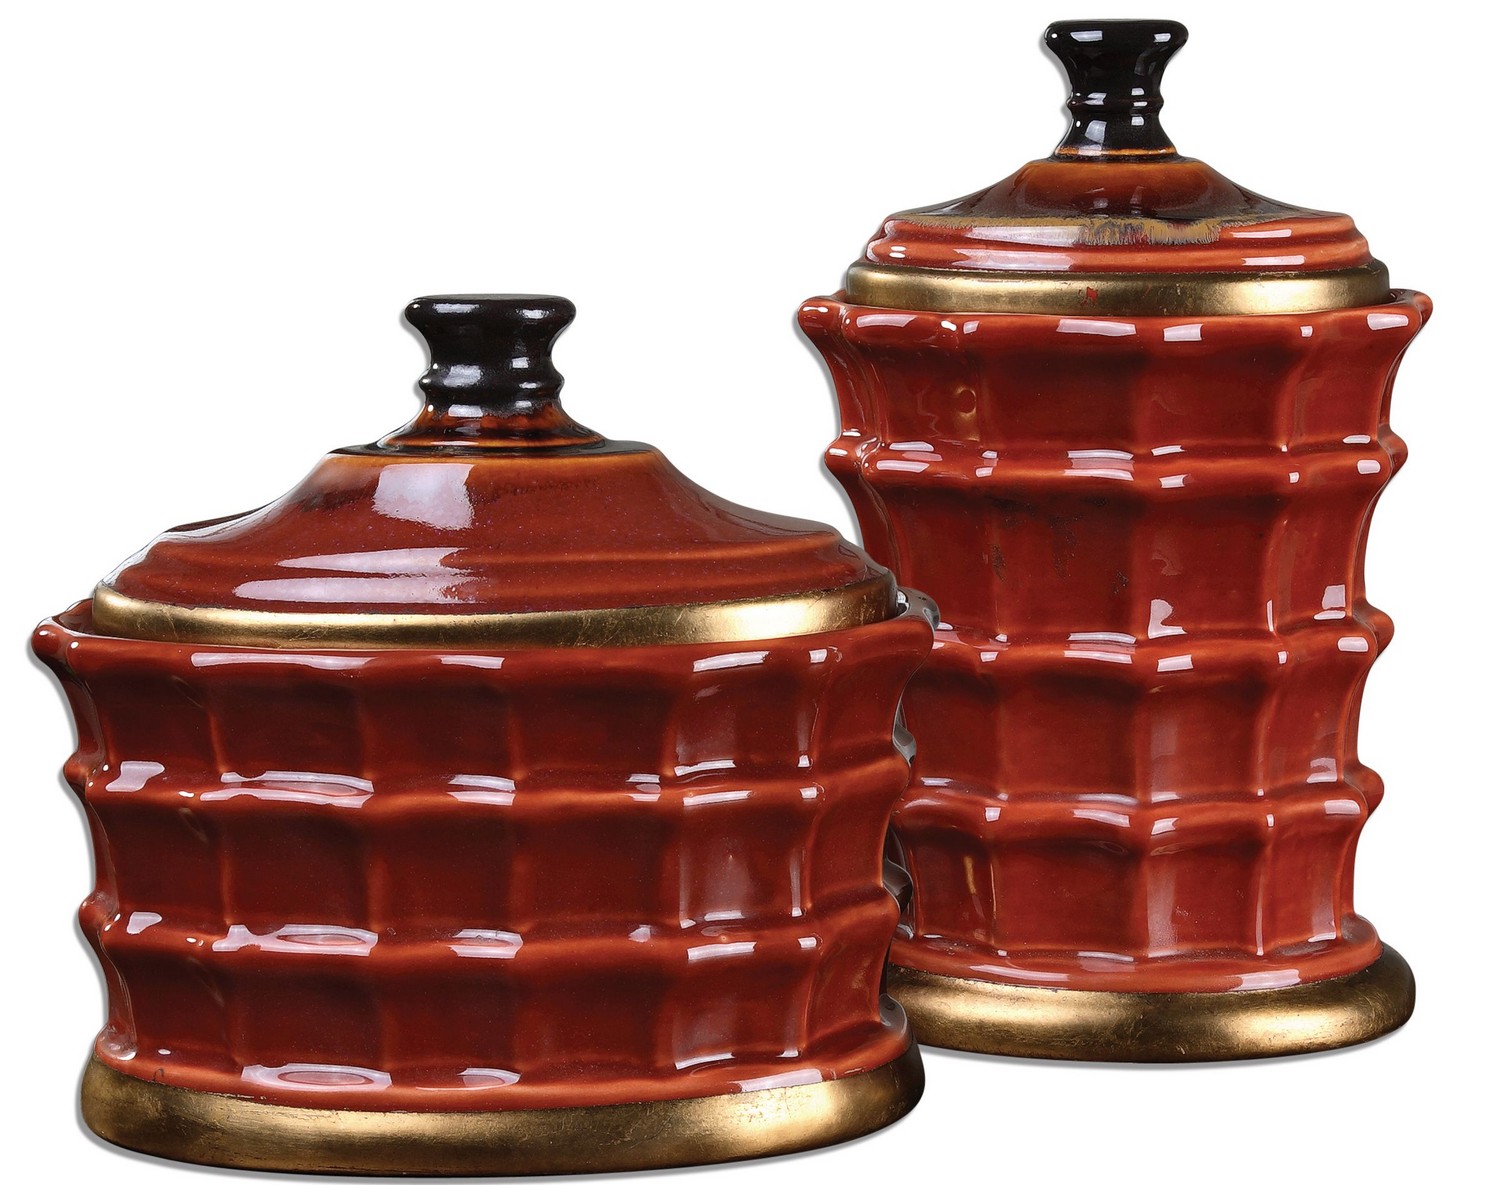 Uttermost Brianna Ceramic Canisters - Set of 2